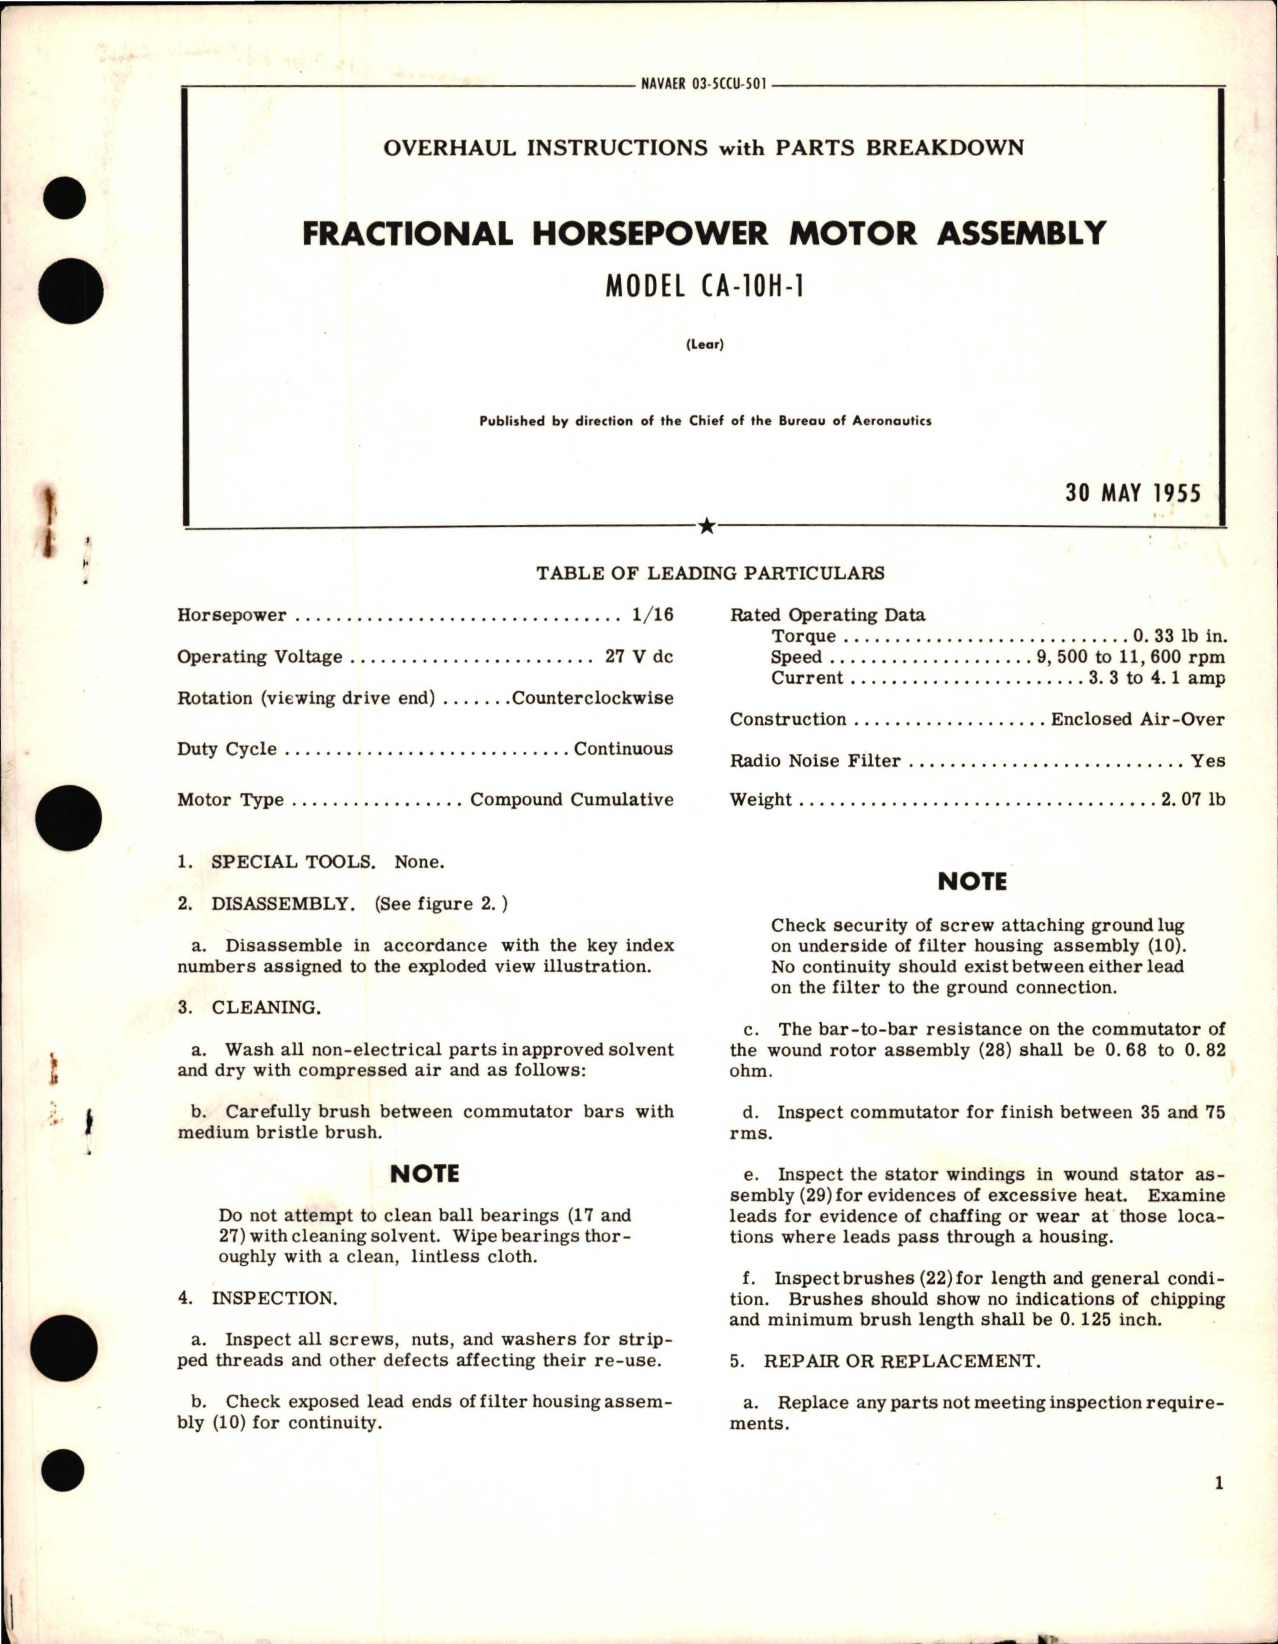 Sample page 1 from AirCorps Library document: Overhaul Instructions with Parts Breakdown for Fractional Horsepower Motor Assembly - Model CA-10H-1 